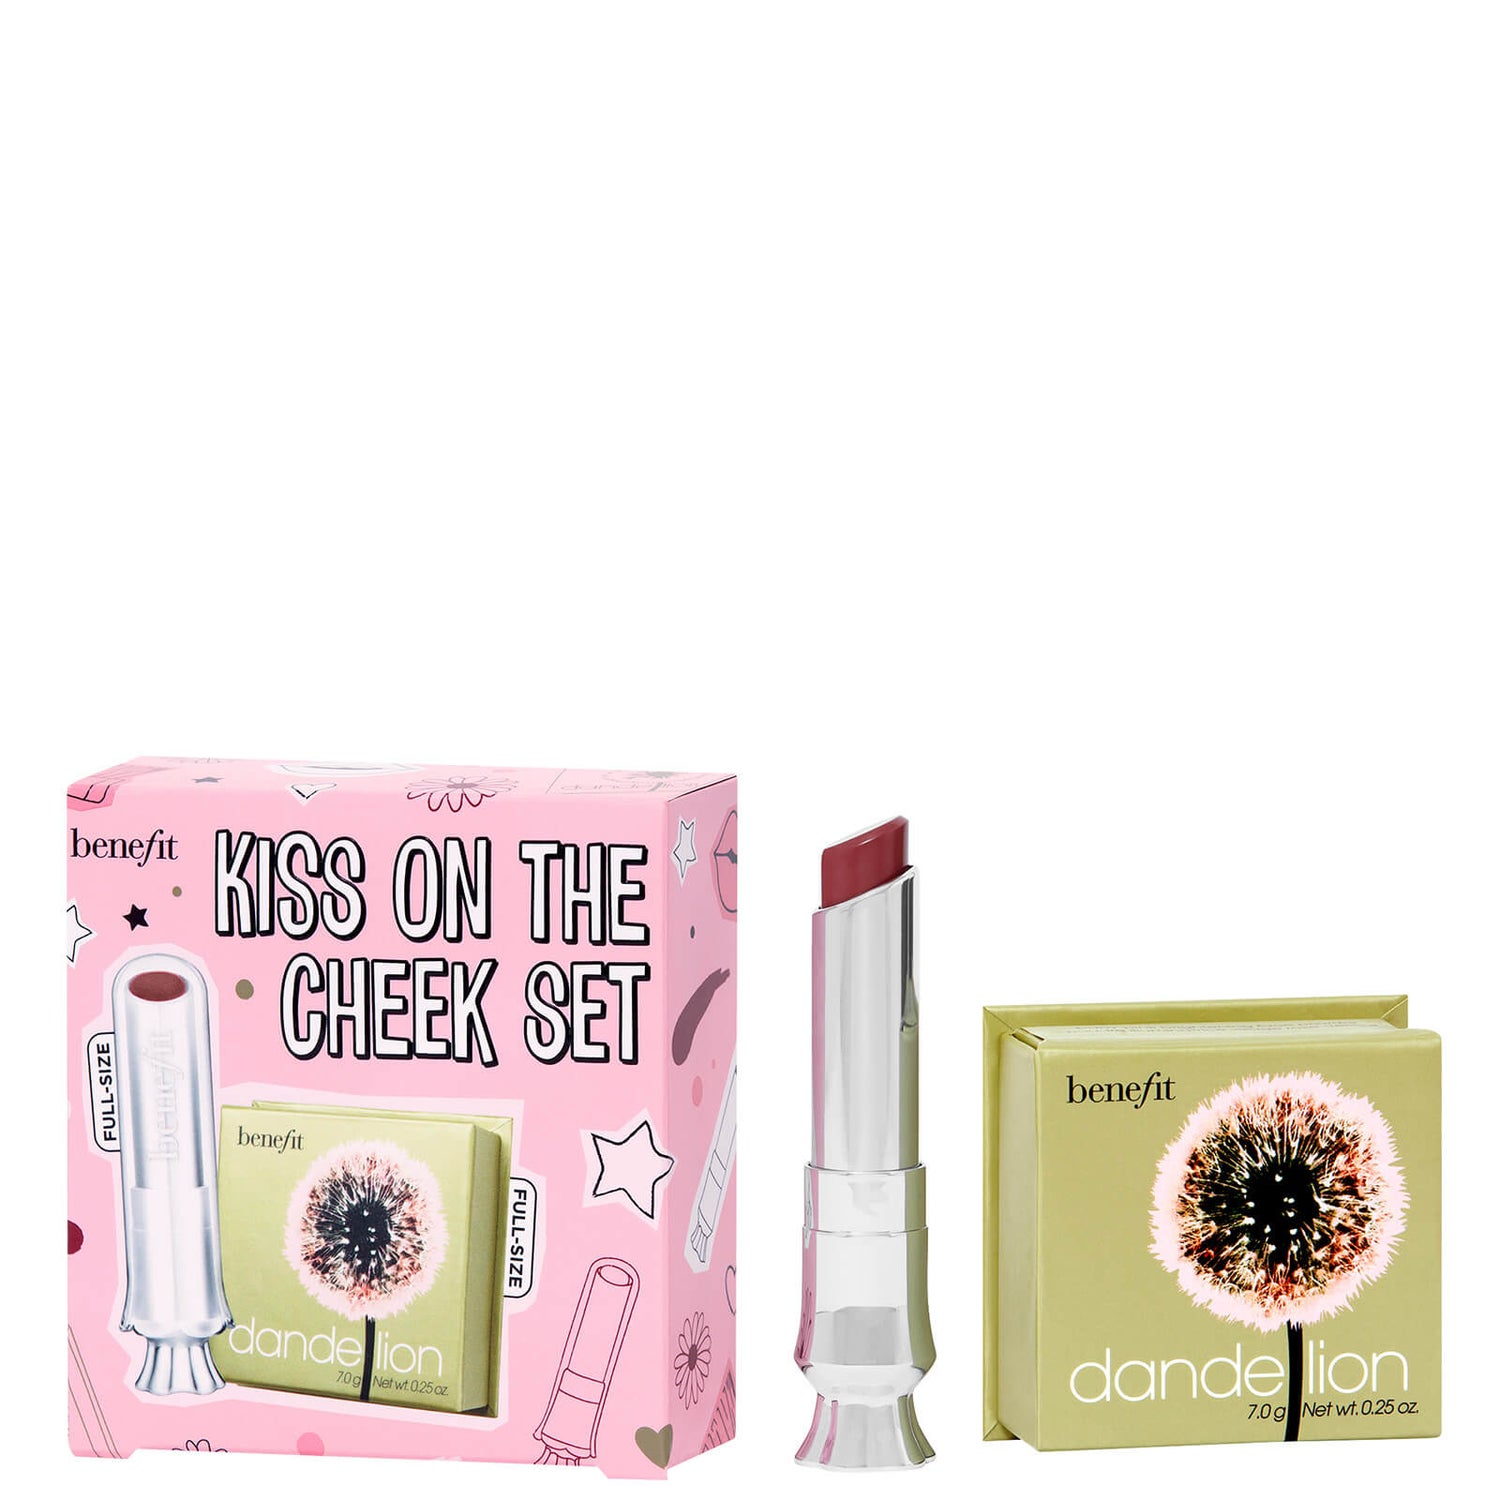 benefit Kiss on the Cheek Colour Lip Balm and Brightening Blush Duo